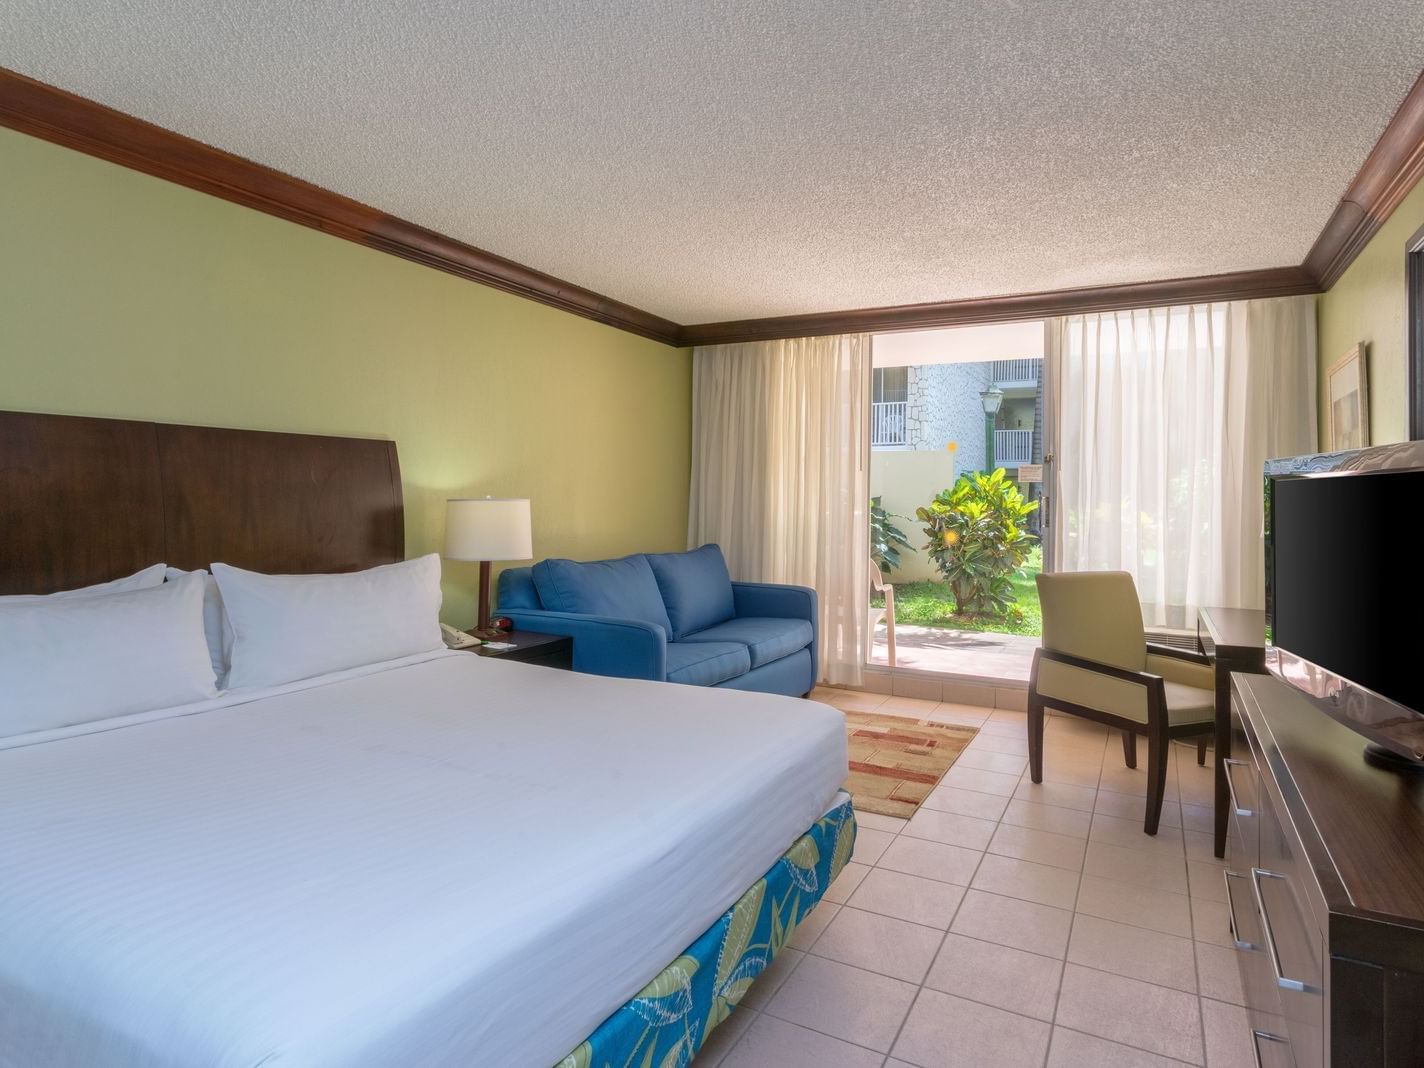 Interior of a Deluxe Room at Holiday Inn Montego Bay